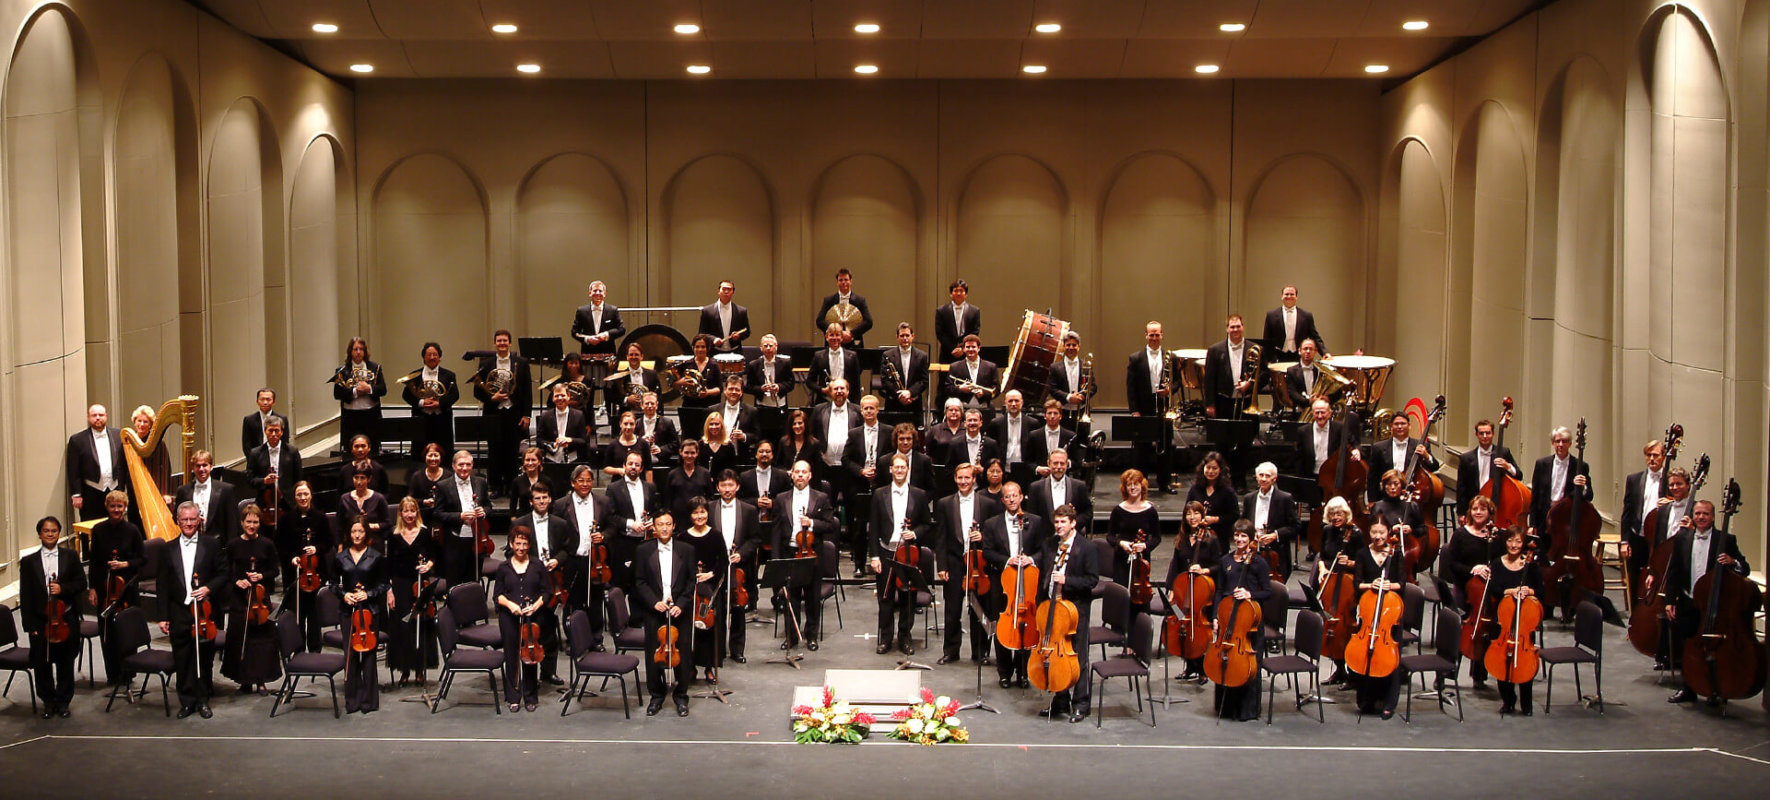 Hawaii Symphony Orchestra on stage